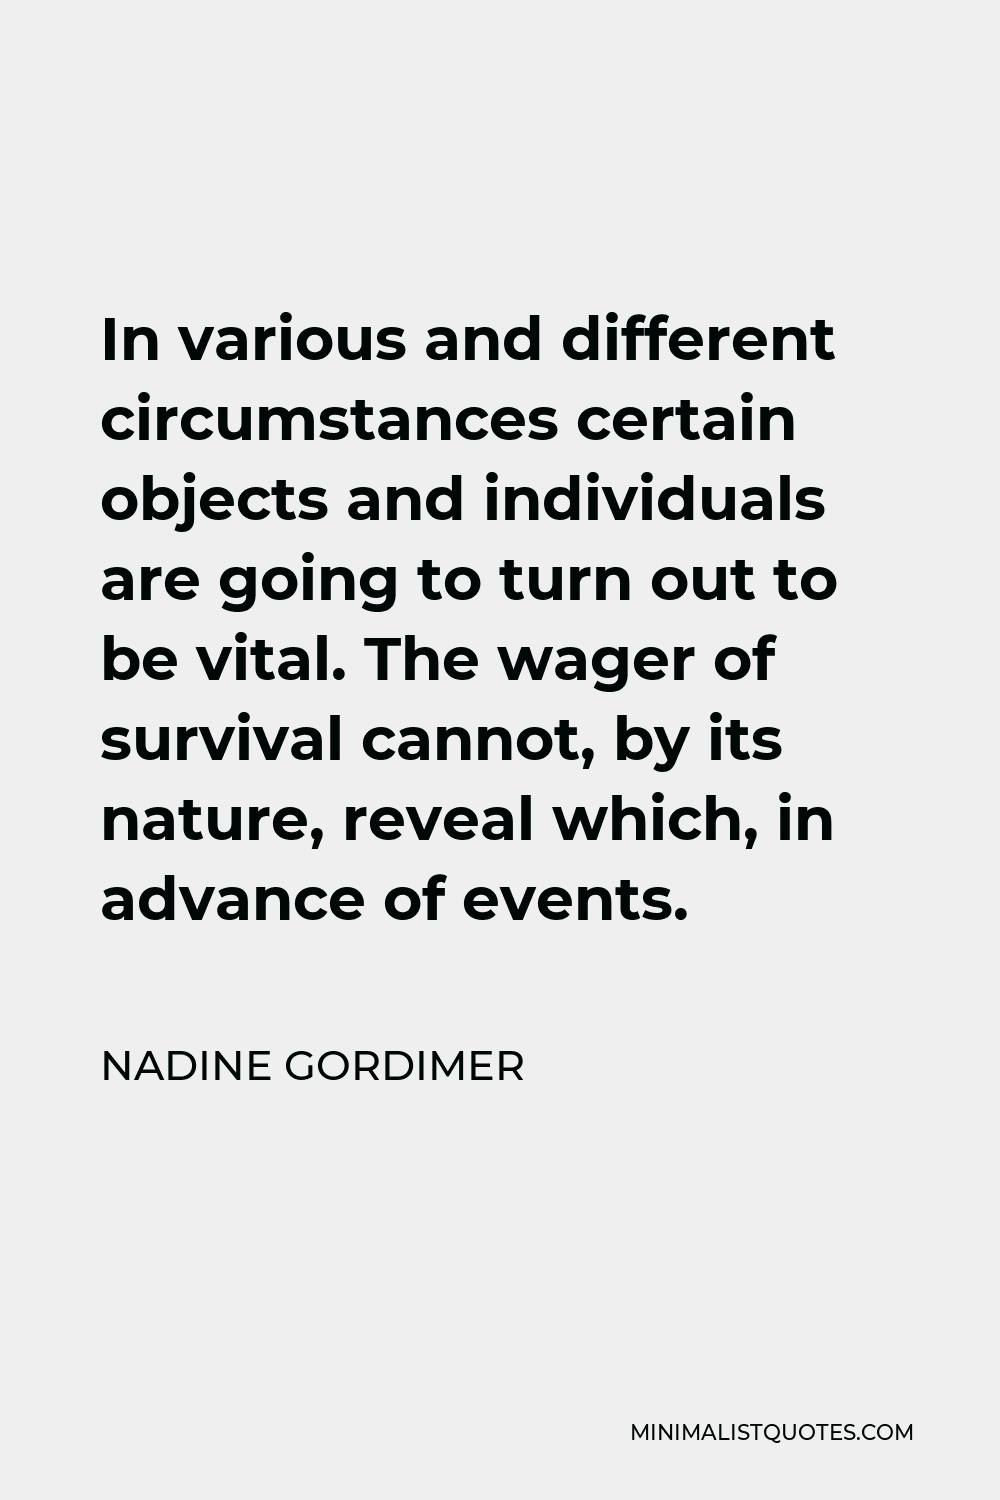 Nadine Gordimer Quote - In various and different circumstances certain objects and individuals are going to turn out to be vital. The wager of survival cannot, by its nature, reveal which, in advance of events.